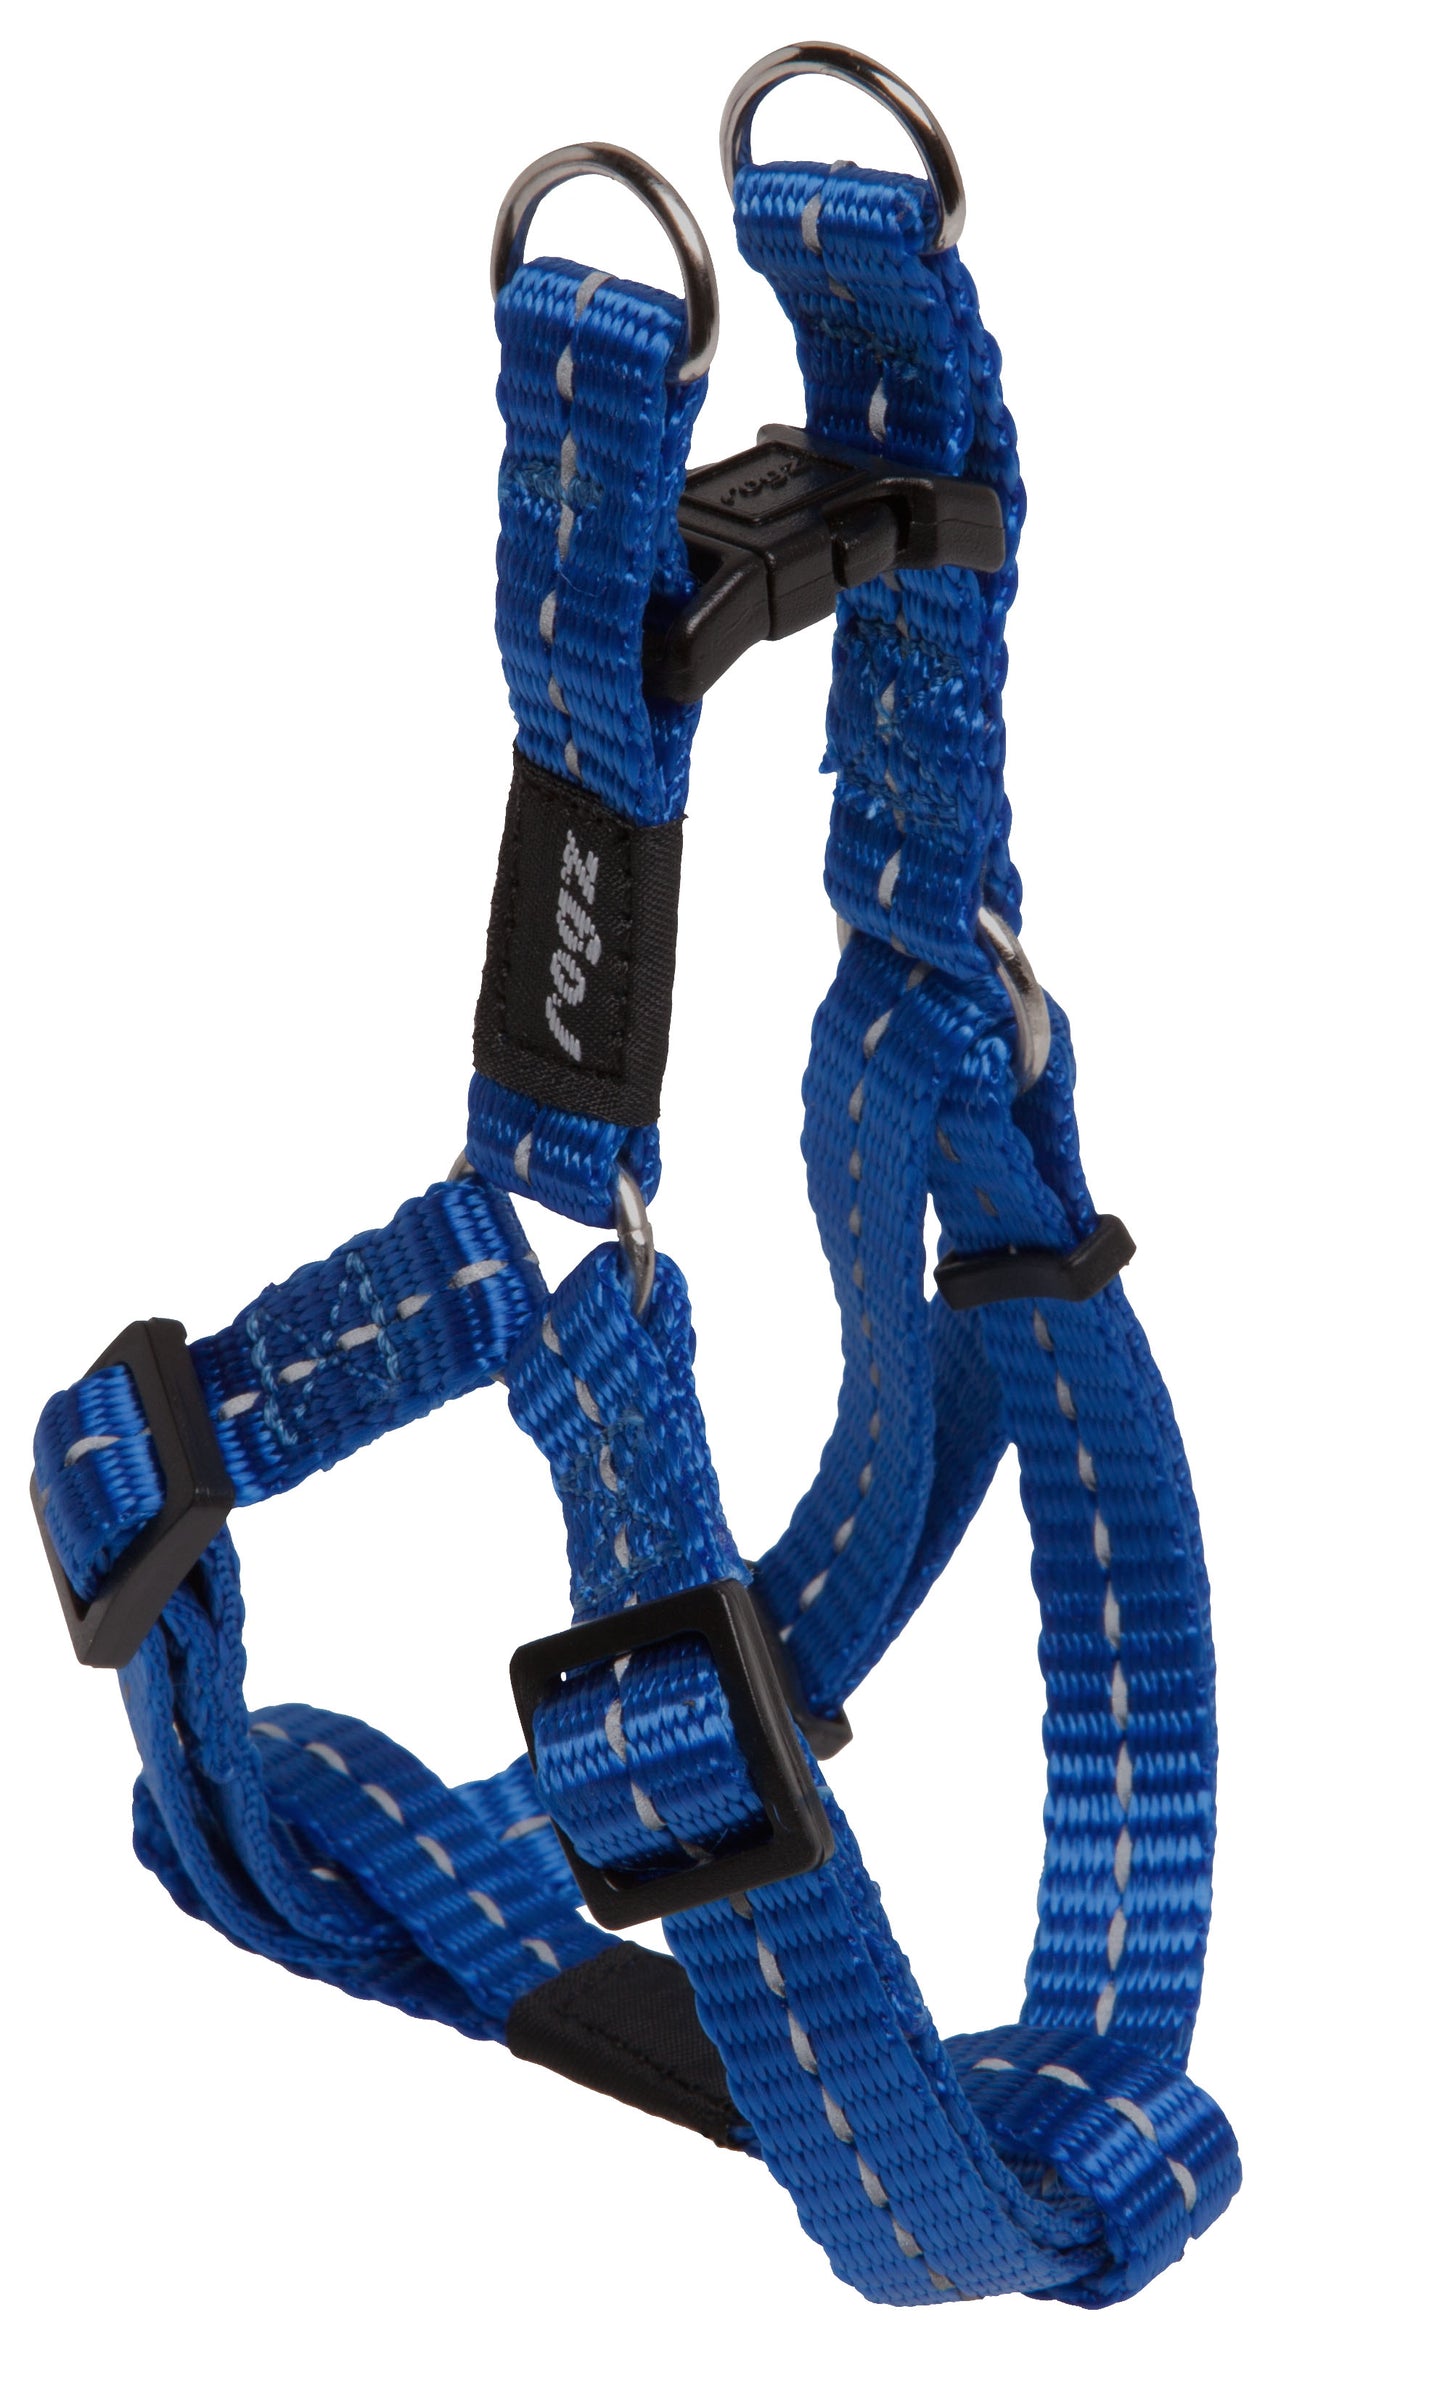 SMALL STEP-IN HARNESS